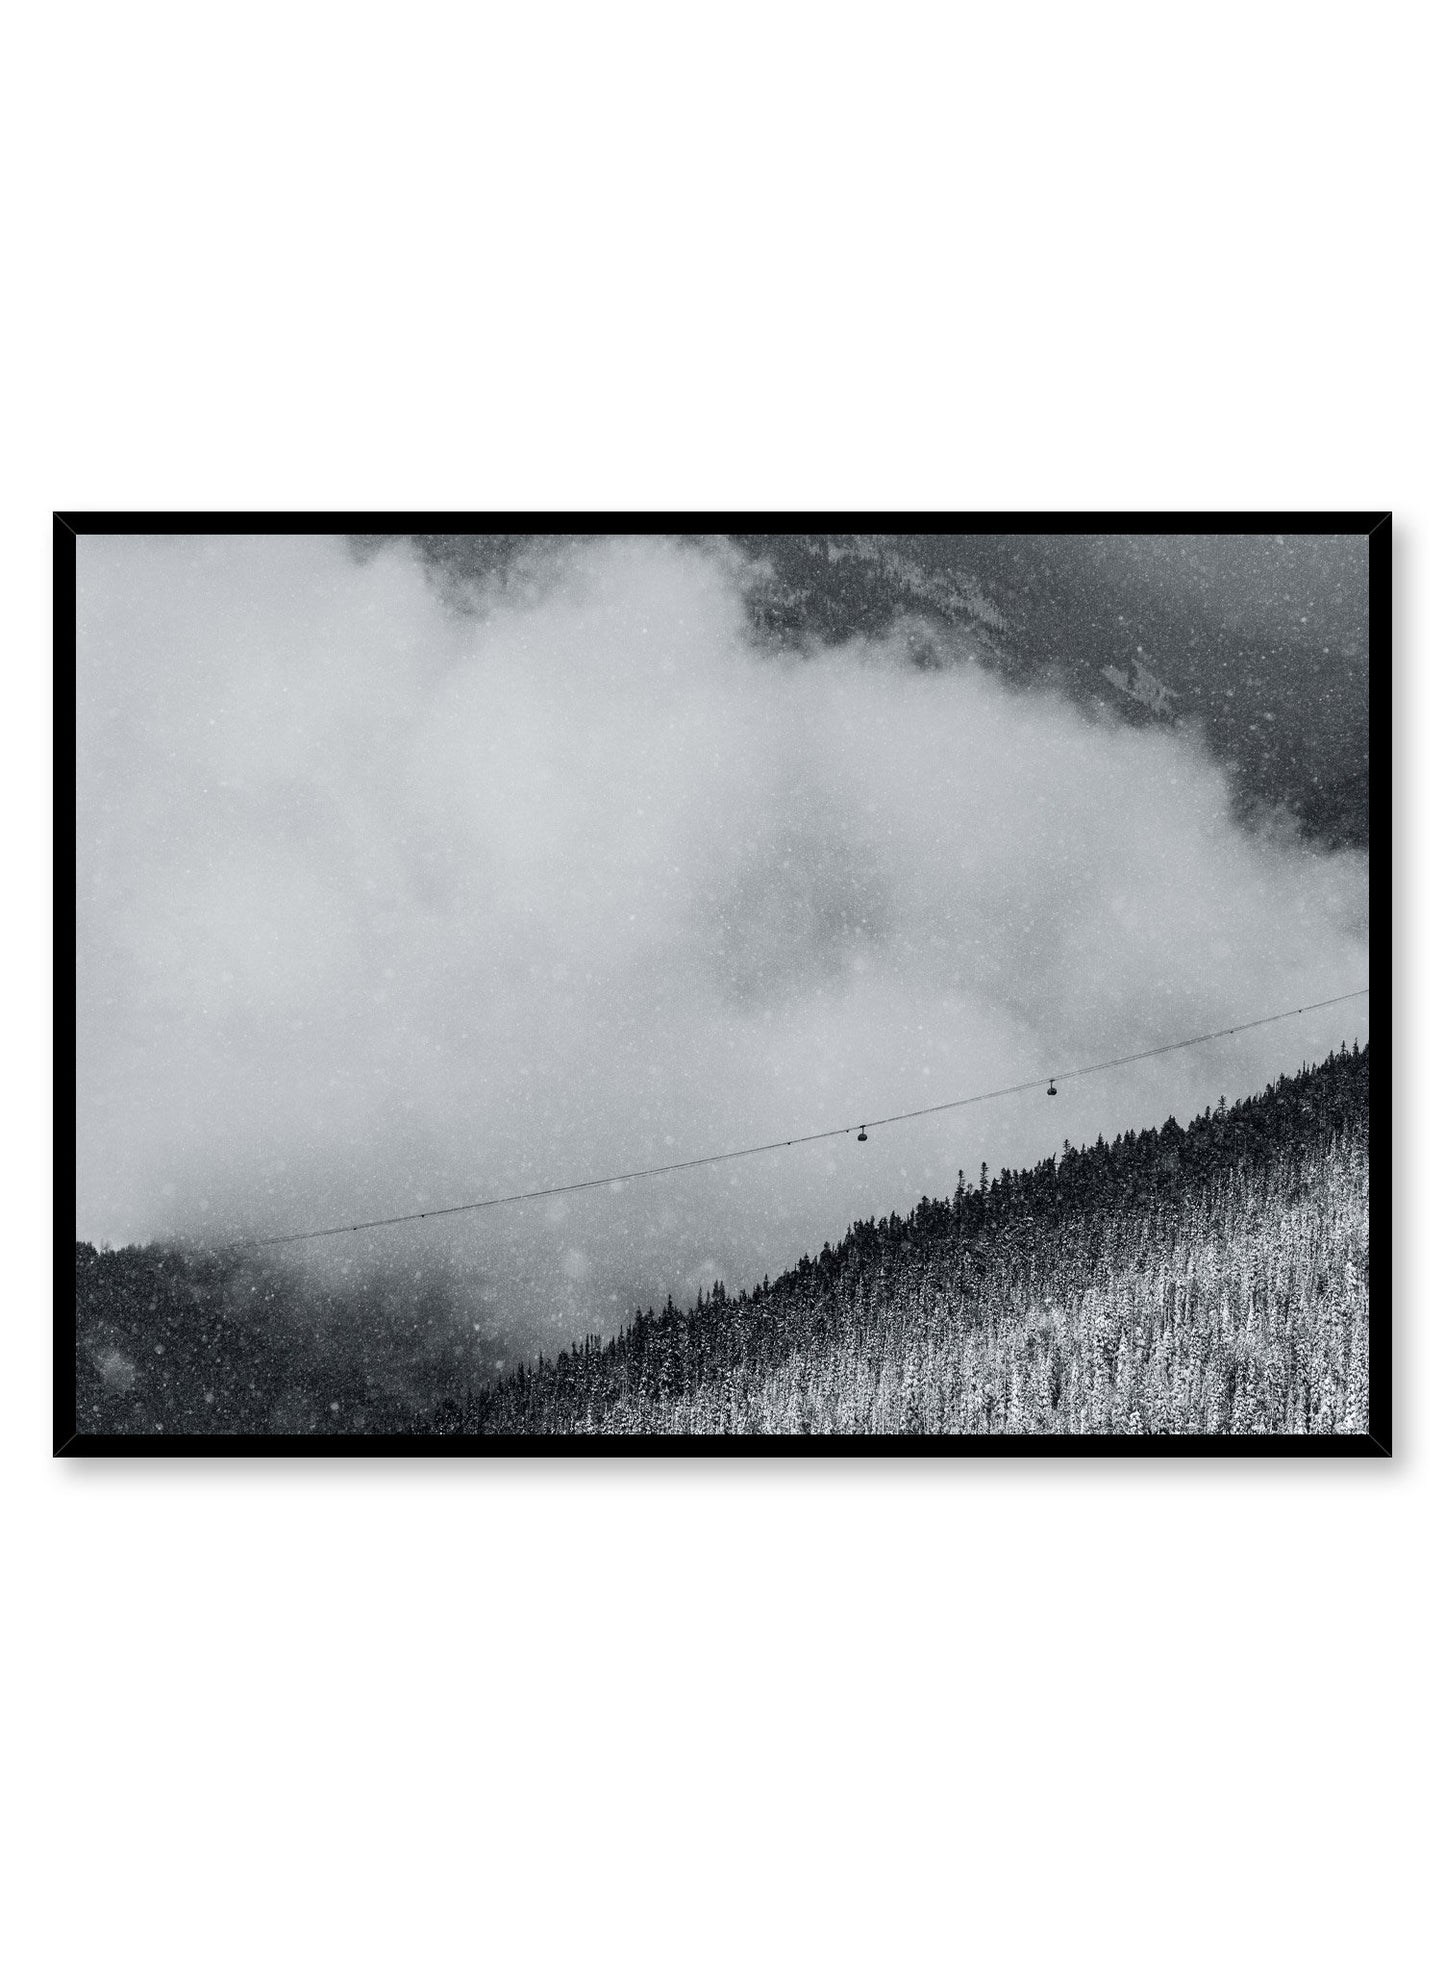 Landscape photography poster by Opposite Wall with mist on a snowy mountain